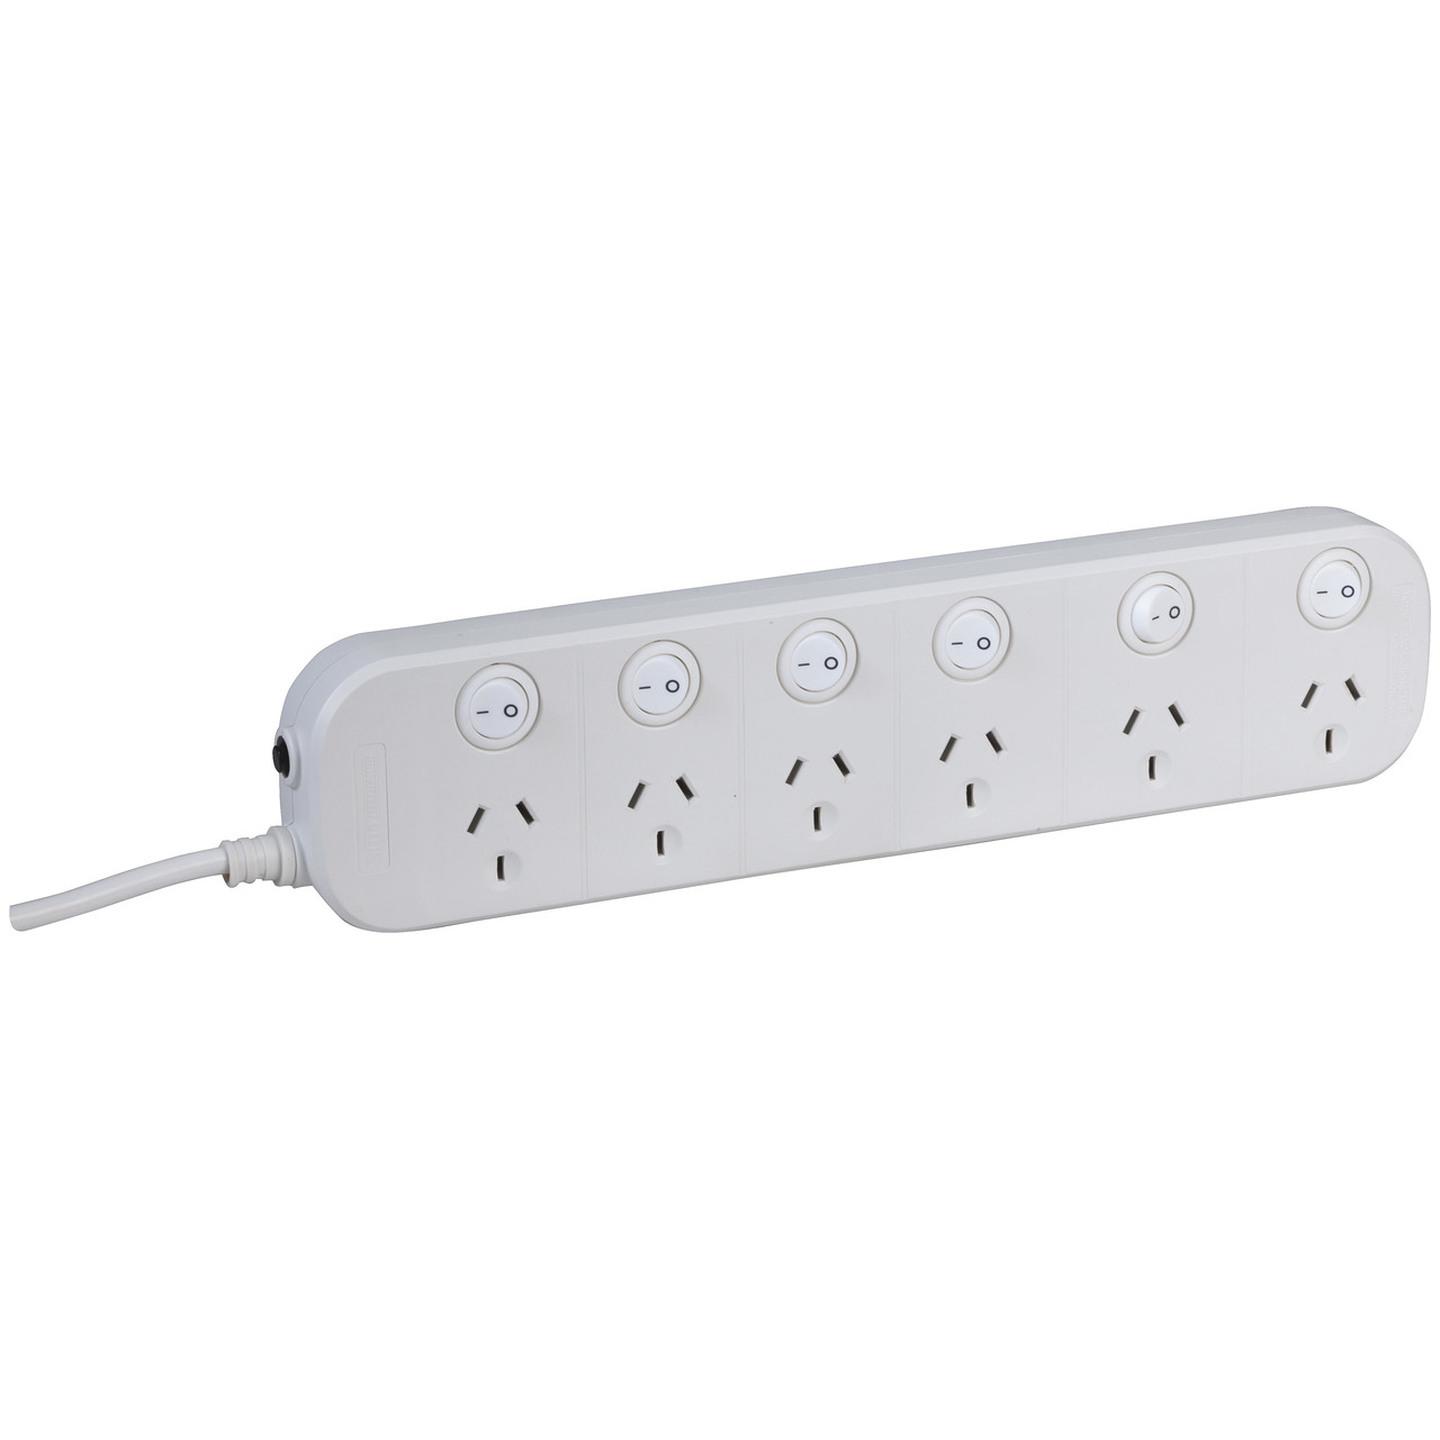 6 way Powerboard with 6 switches and Surge Overload Protection